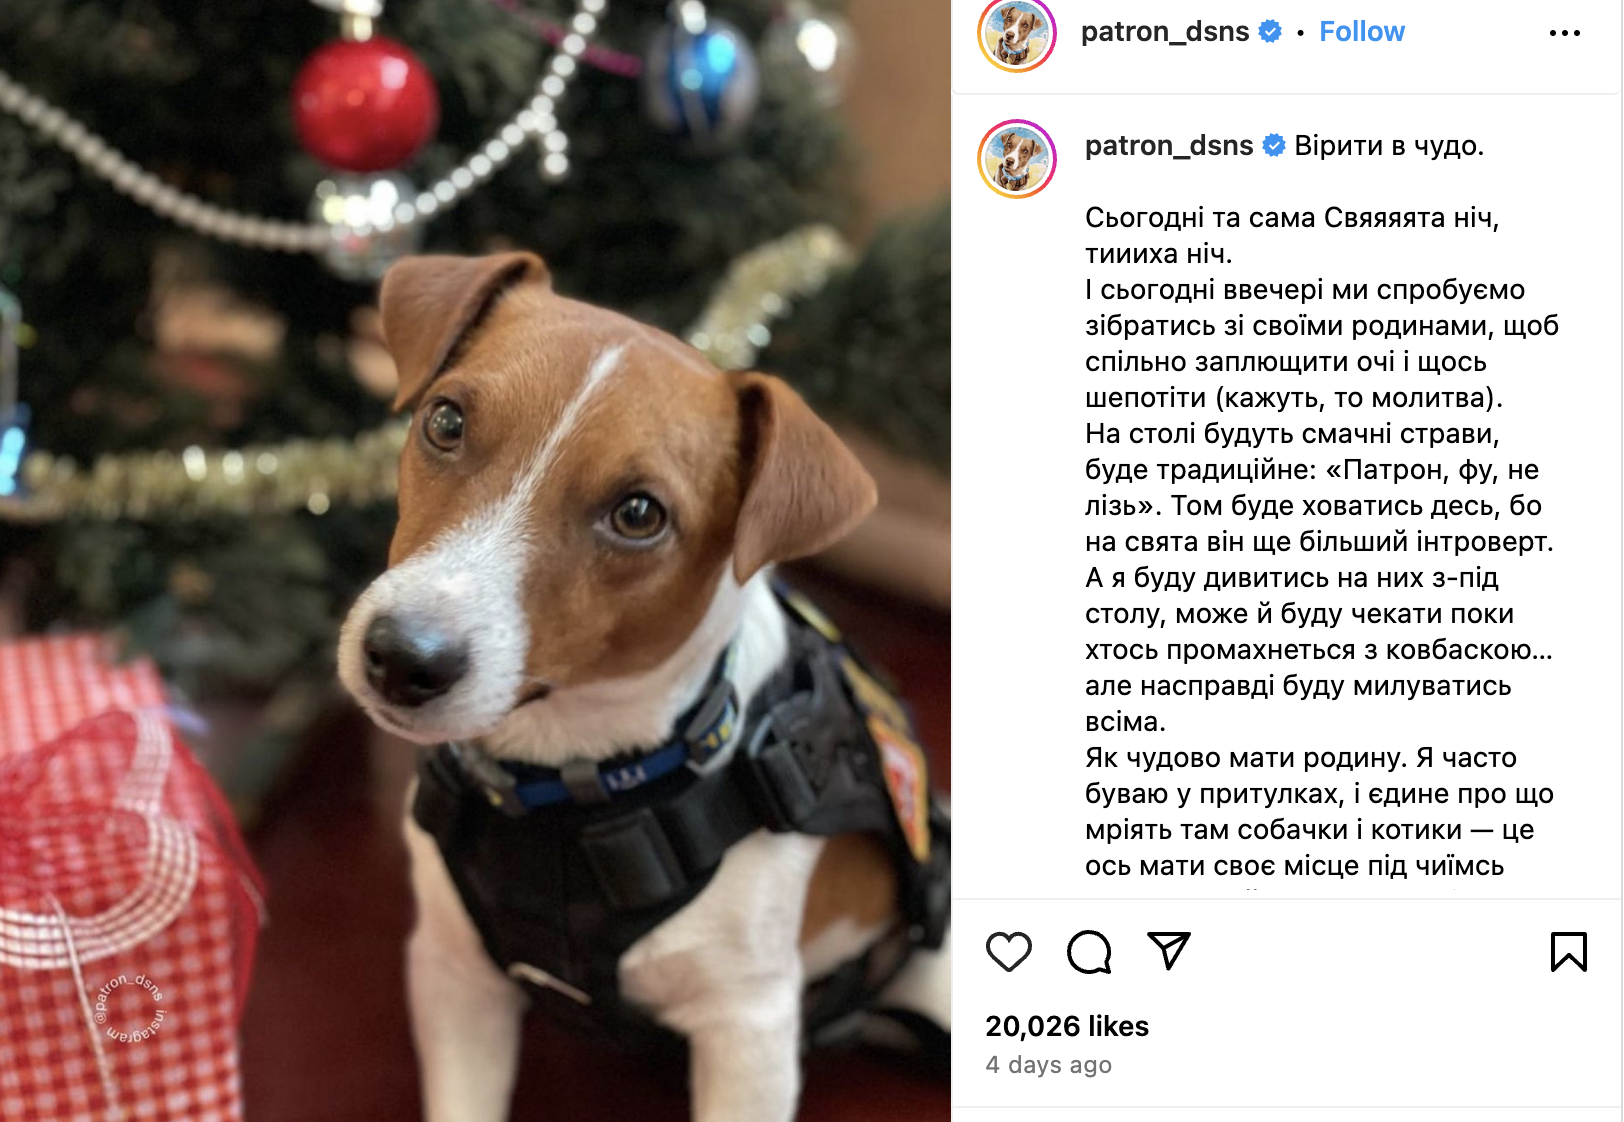 A screen shot of a post on Patron the Sapper dog's official Instagram from 24 DEC 2023. Patron is a brown and white short haired Jack Russel terrier. He is sitting in the foreground with his head slightly cocked and is wearing his work harness. Behind him is a Christmas tree with ornaments. To his left is a package wrapped in red and white checked paper with a bow.